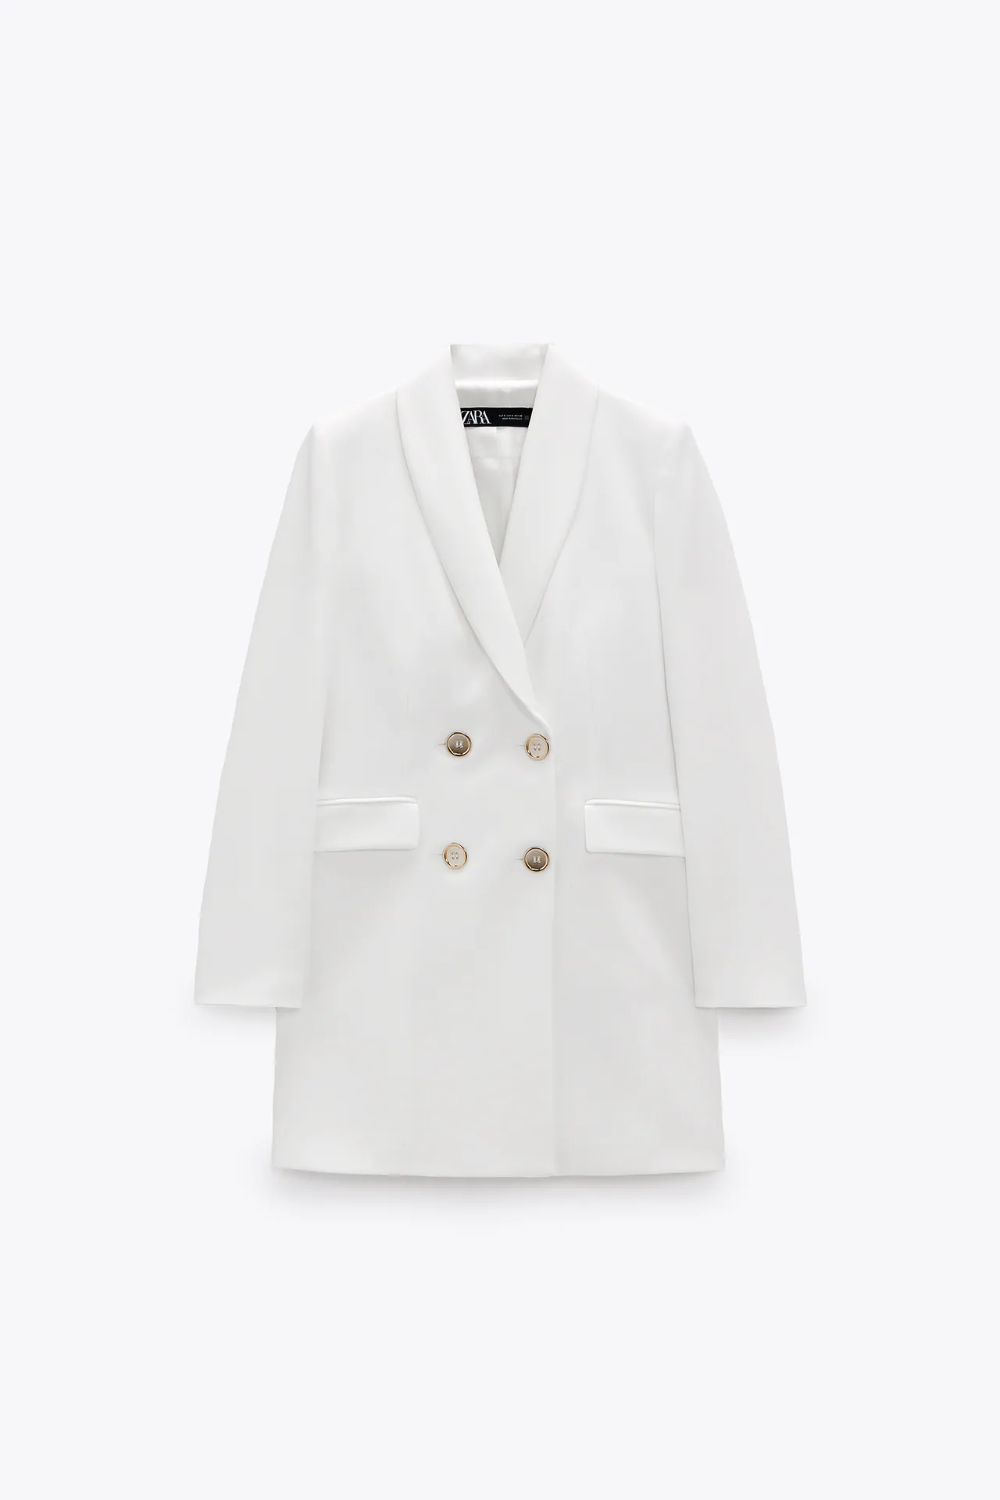 https://flyfiercefab.com/wp-content/uploads/2021/08/Zara-White-Double-Breasted-Long-Blazer.png